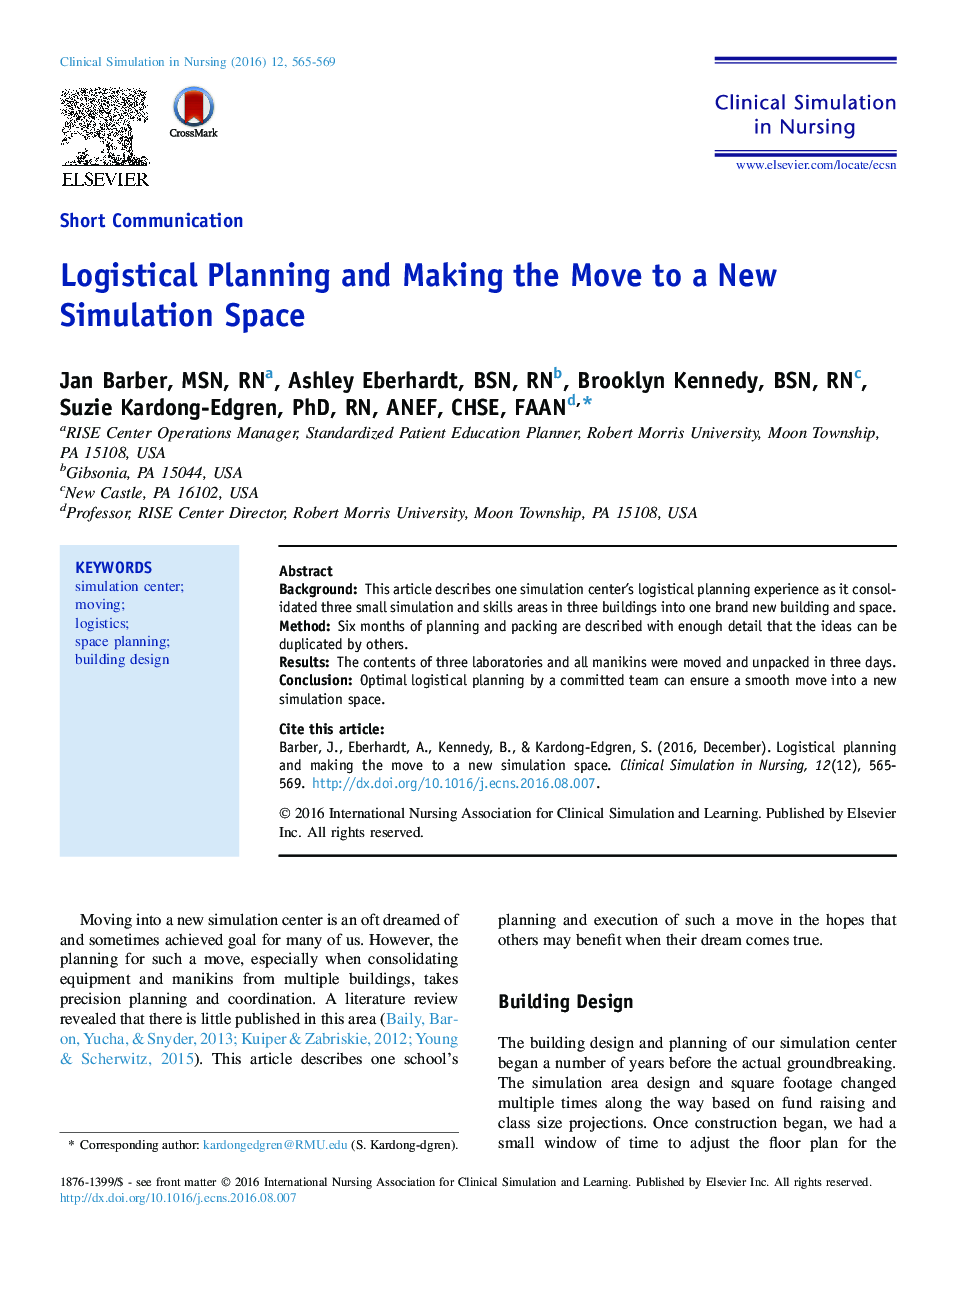 Logistical Planning and Making the Move to a New Simulation Space